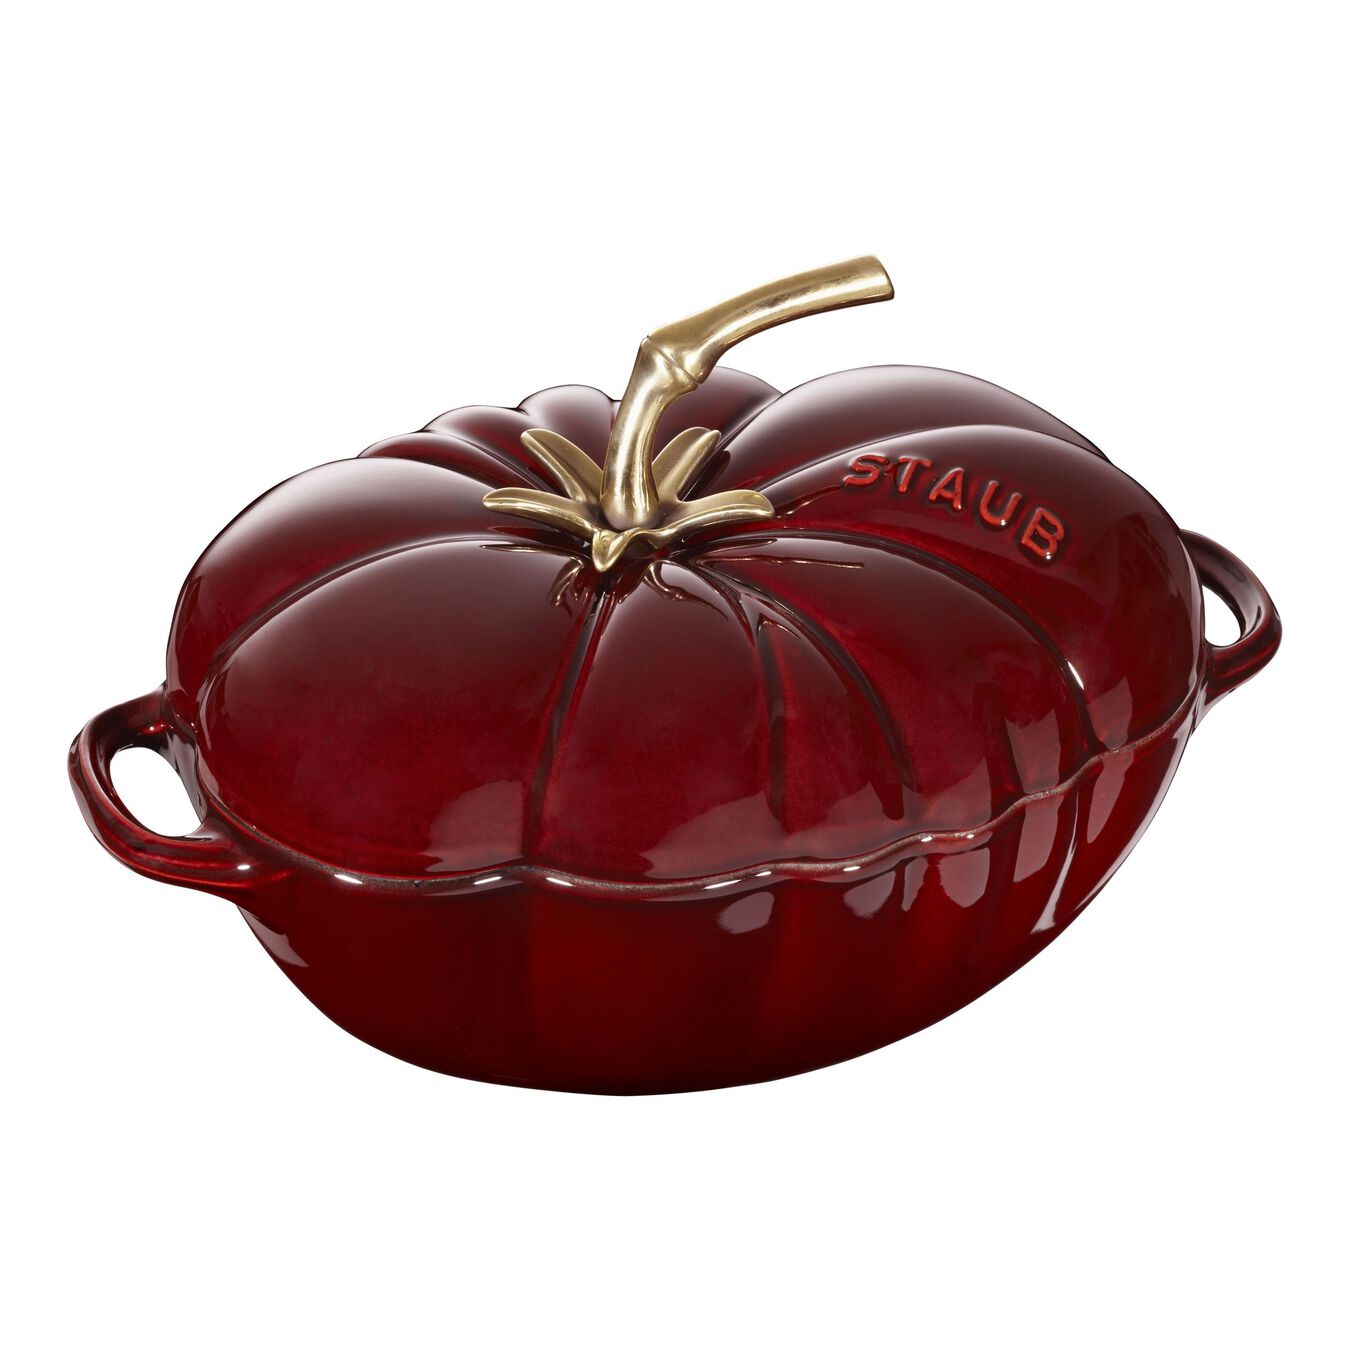 2.8 l cast iron tomato Cocotte, grenadine-red - Visual Imperfections,,large 1